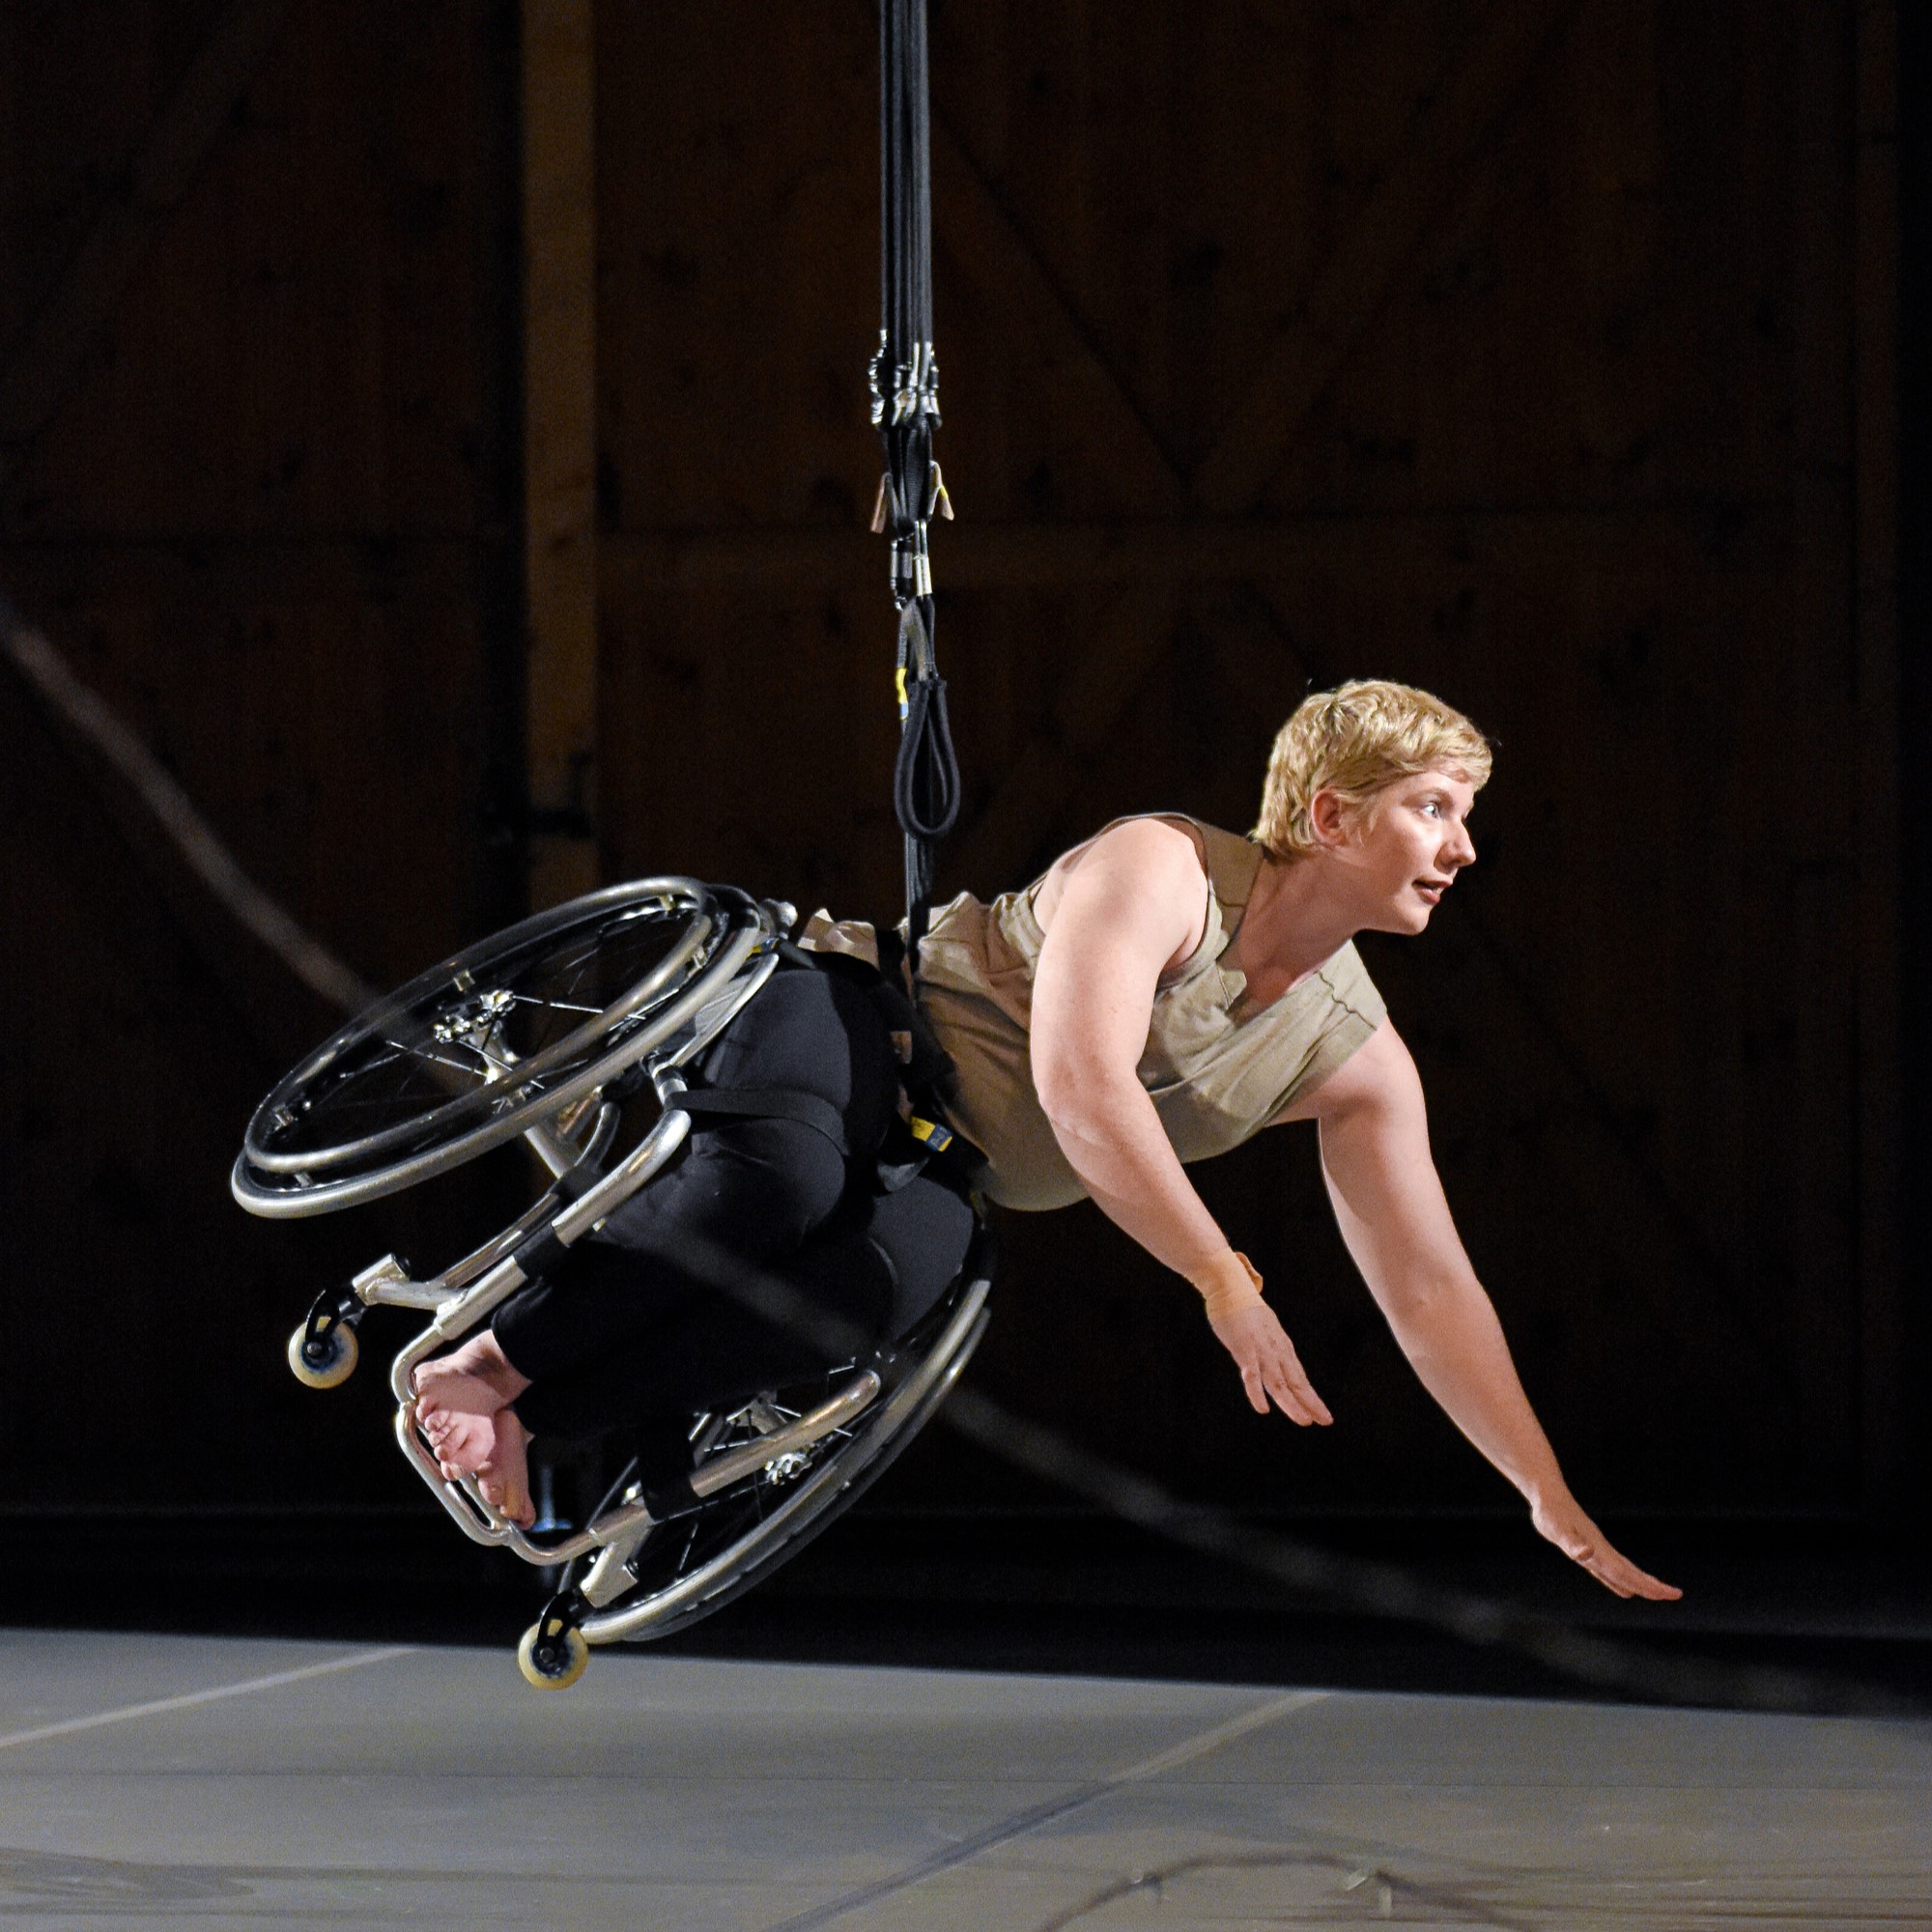 A white dancer with cropped blonde hair is suspended midair. She looks to the right, arms extended from pushing off the ground, body and wheelchair diagonal to the floor. A black cord at her waist extends up.